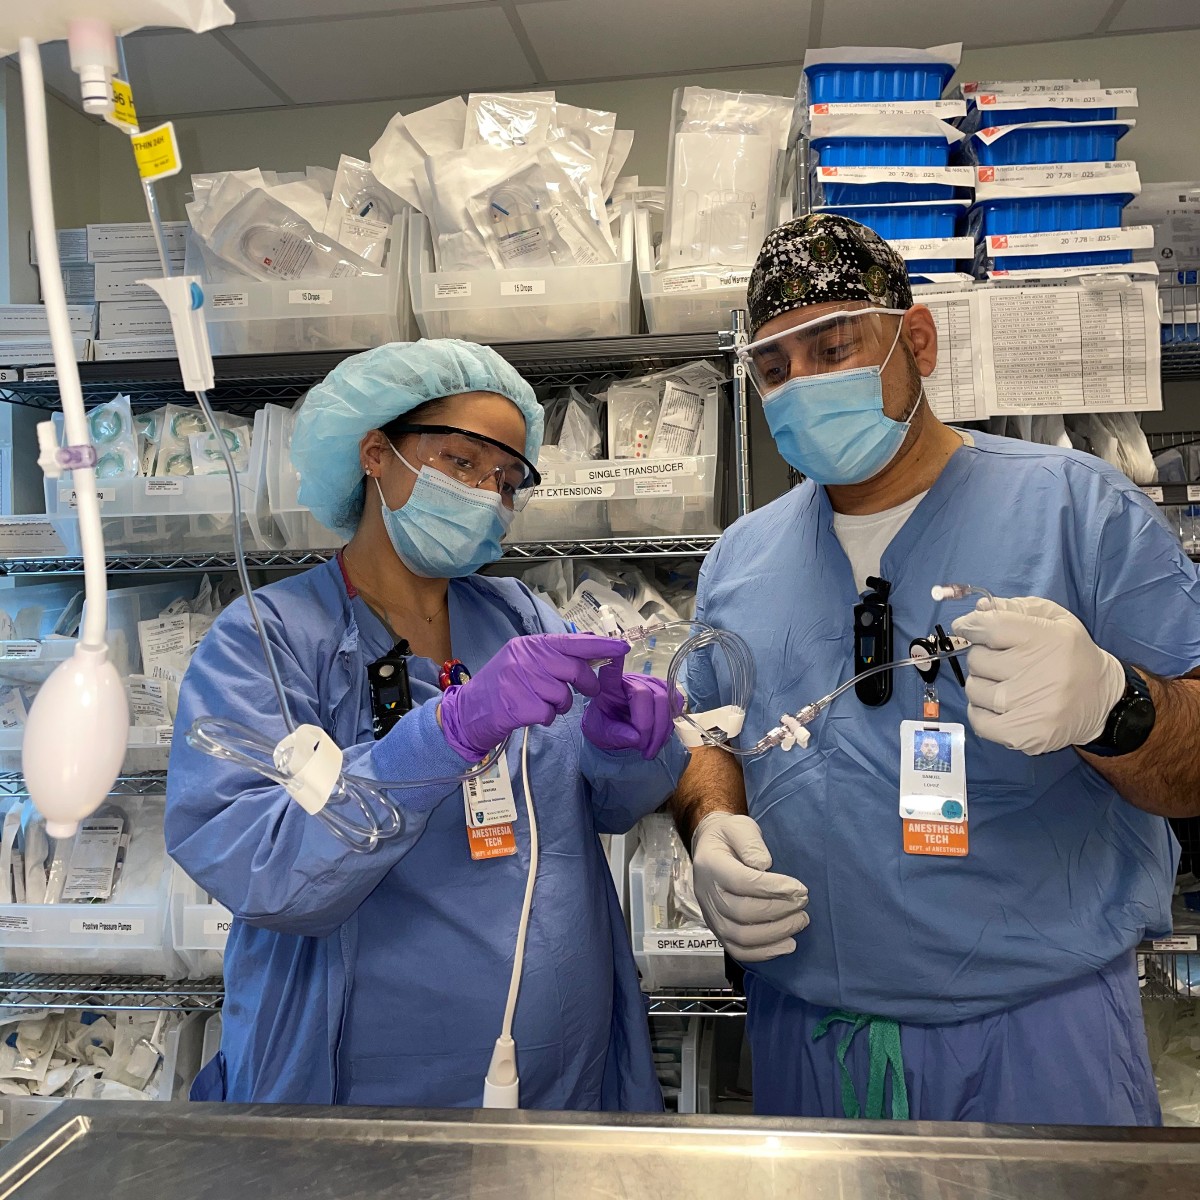 It's #AnesthesiaTechWeek! Anesthesia techs help prepare & utilize the anesthesia equipment. In the OR, techs maintain delivery systems/supplies throughout the administration of #anesthesia. Meet Sandra Ventura & Sam Lopez, #MGHanesthesia techs. Thank you for all that you do!